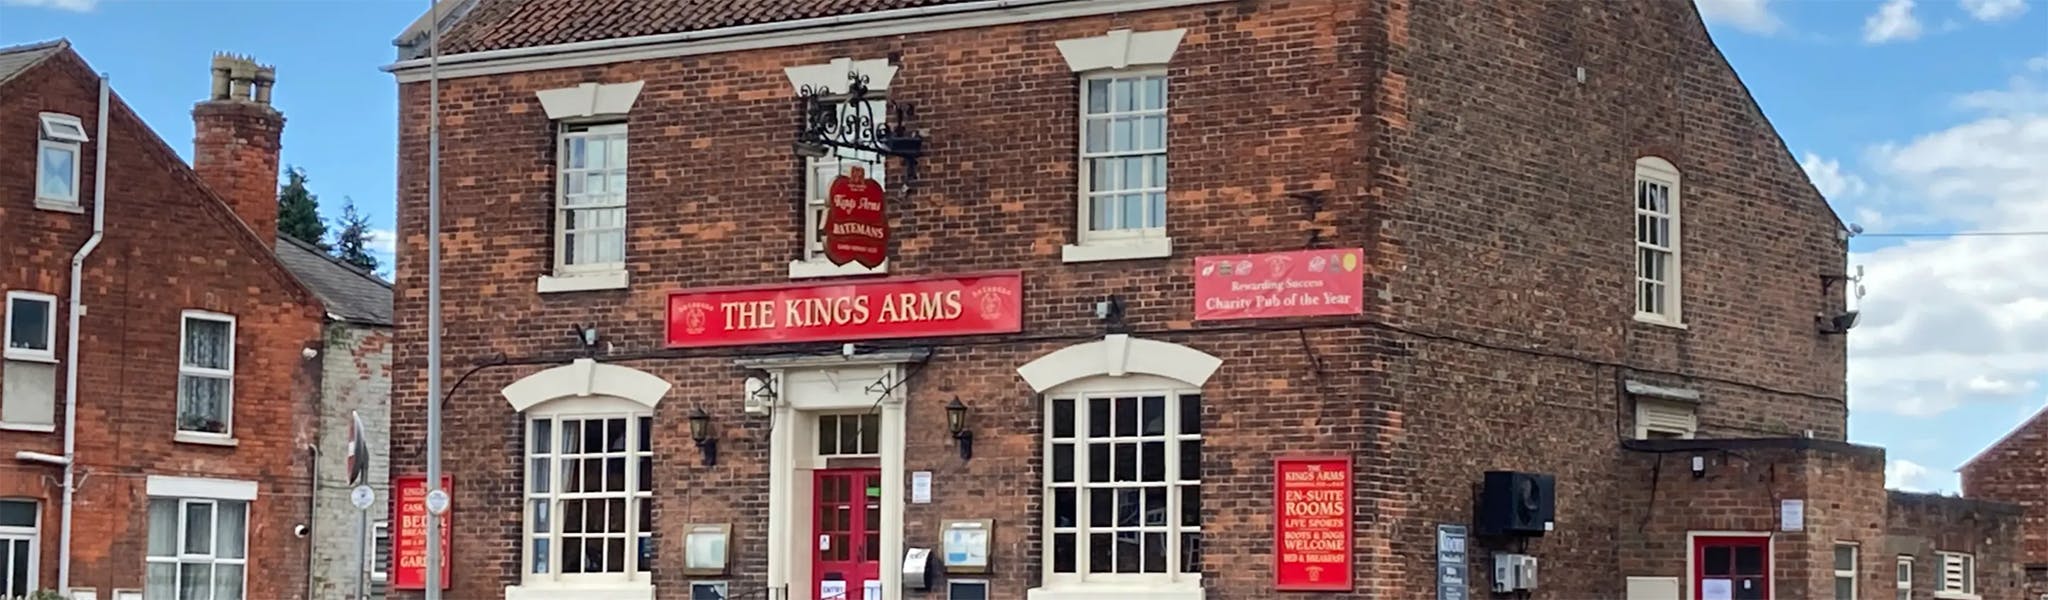 A picture of the front of The Kings Arms pub in Boston